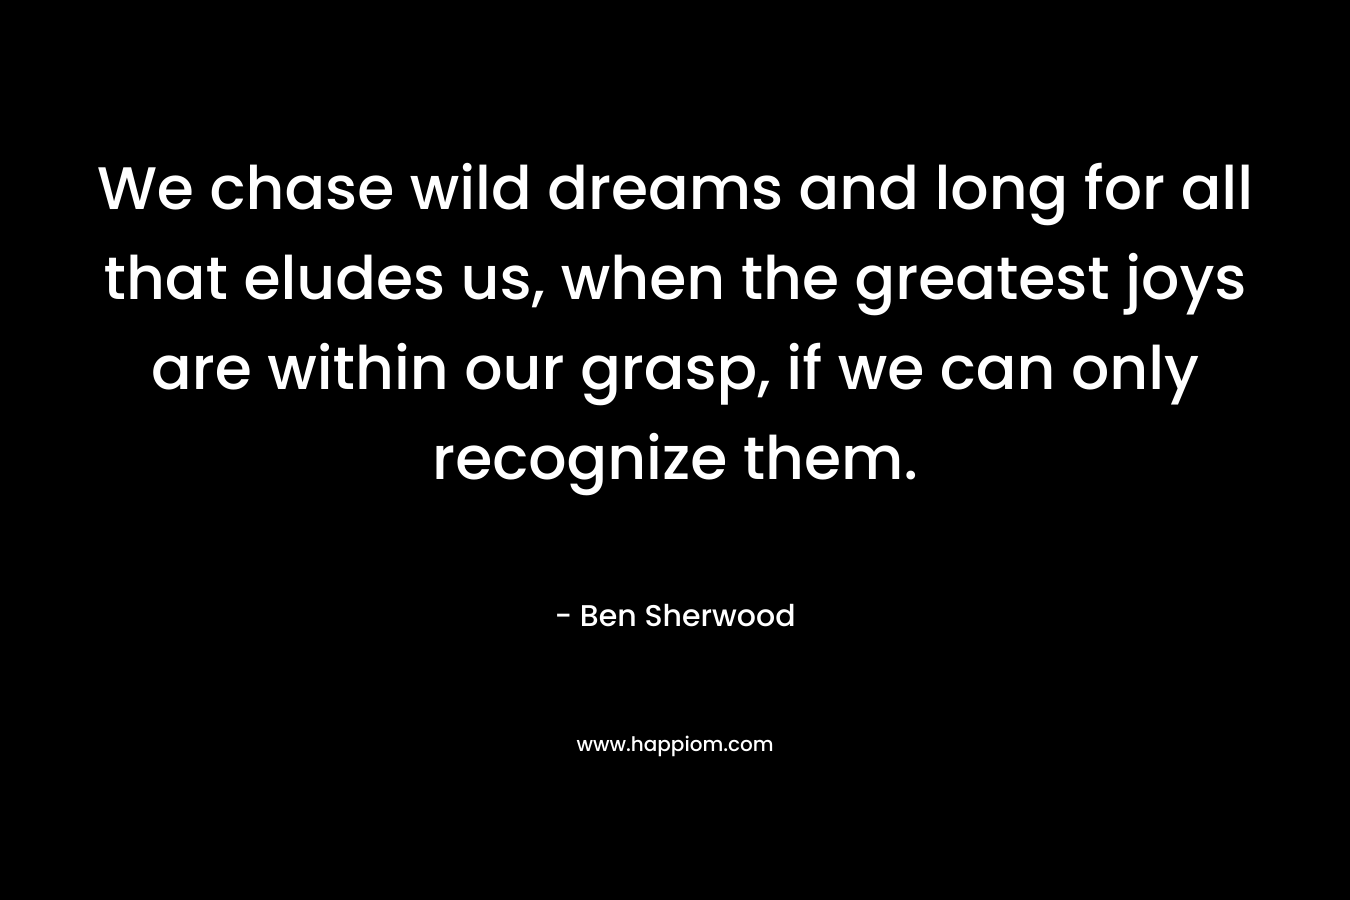 We chase wild dreams and long for all that eludes us, when the greatest joys are within our grasp, if we can only recognize them. – Ben Sherwood